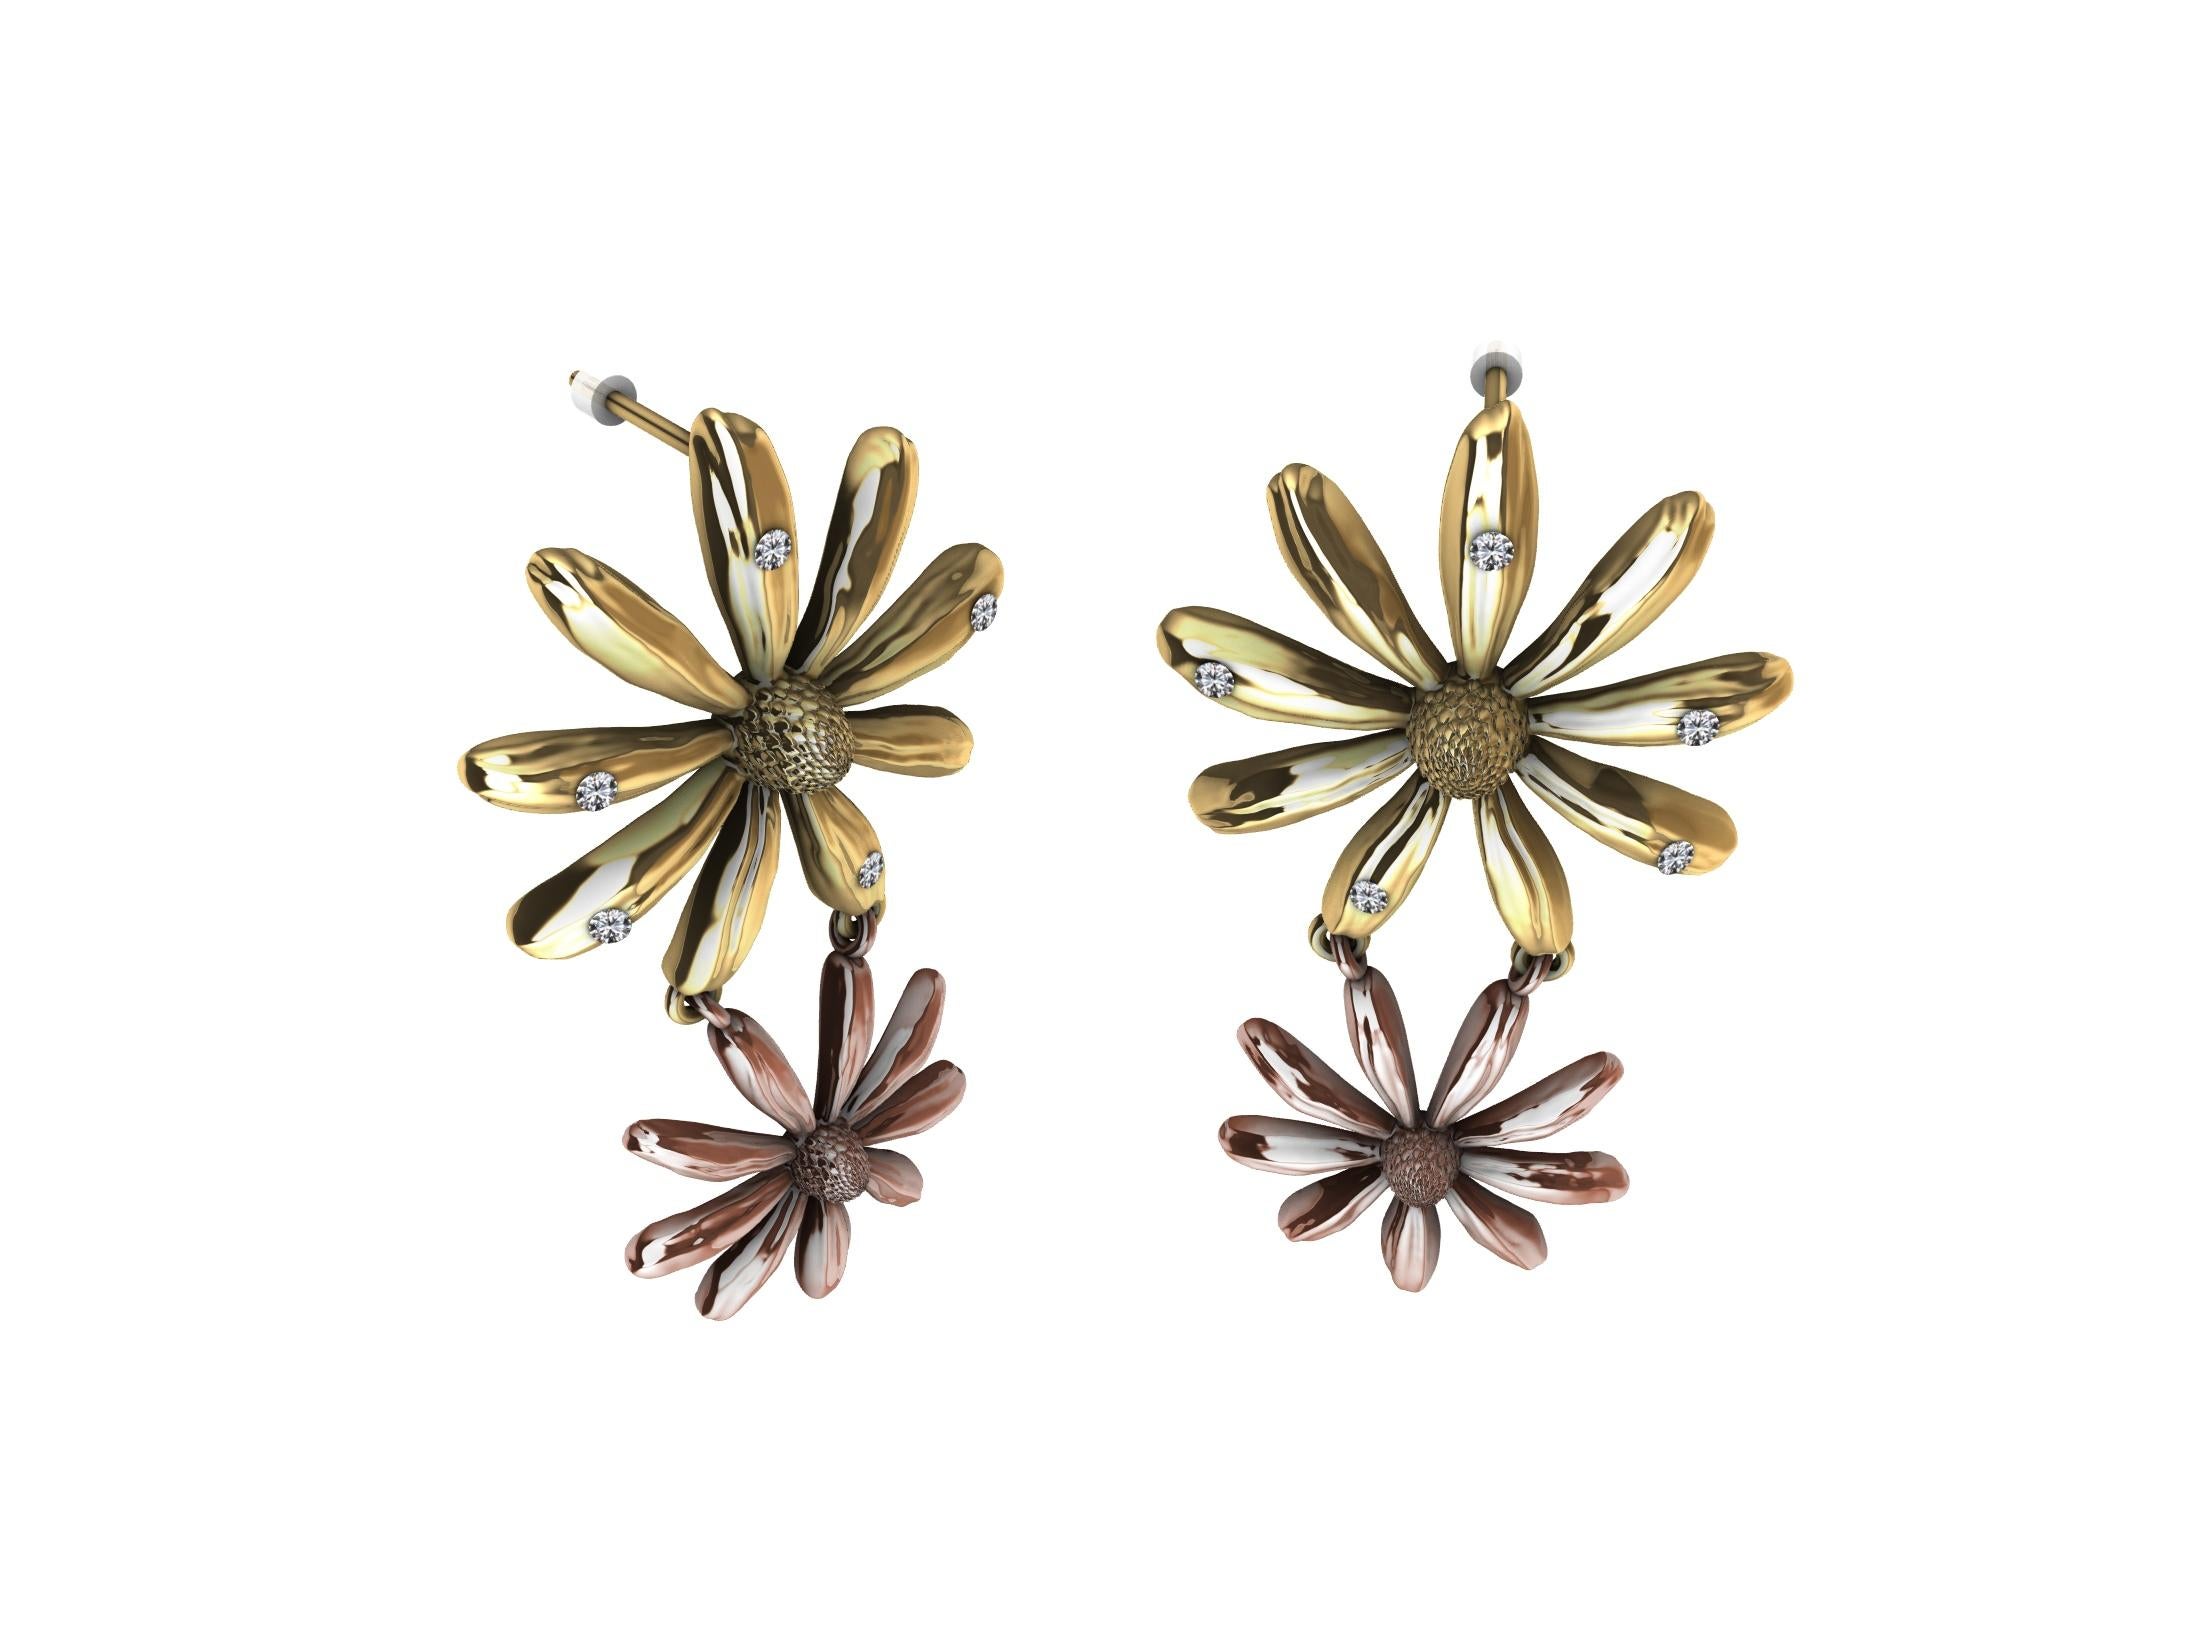 Tiffany designer, Thomas Kurilla is sculpting flowers for their details and lovely shapes. Sculpture is my passion. Flowers are works of art. This pair of earrings has it all. Diamonds, two color golds, and a textured cone.
 Made to order in NYC,